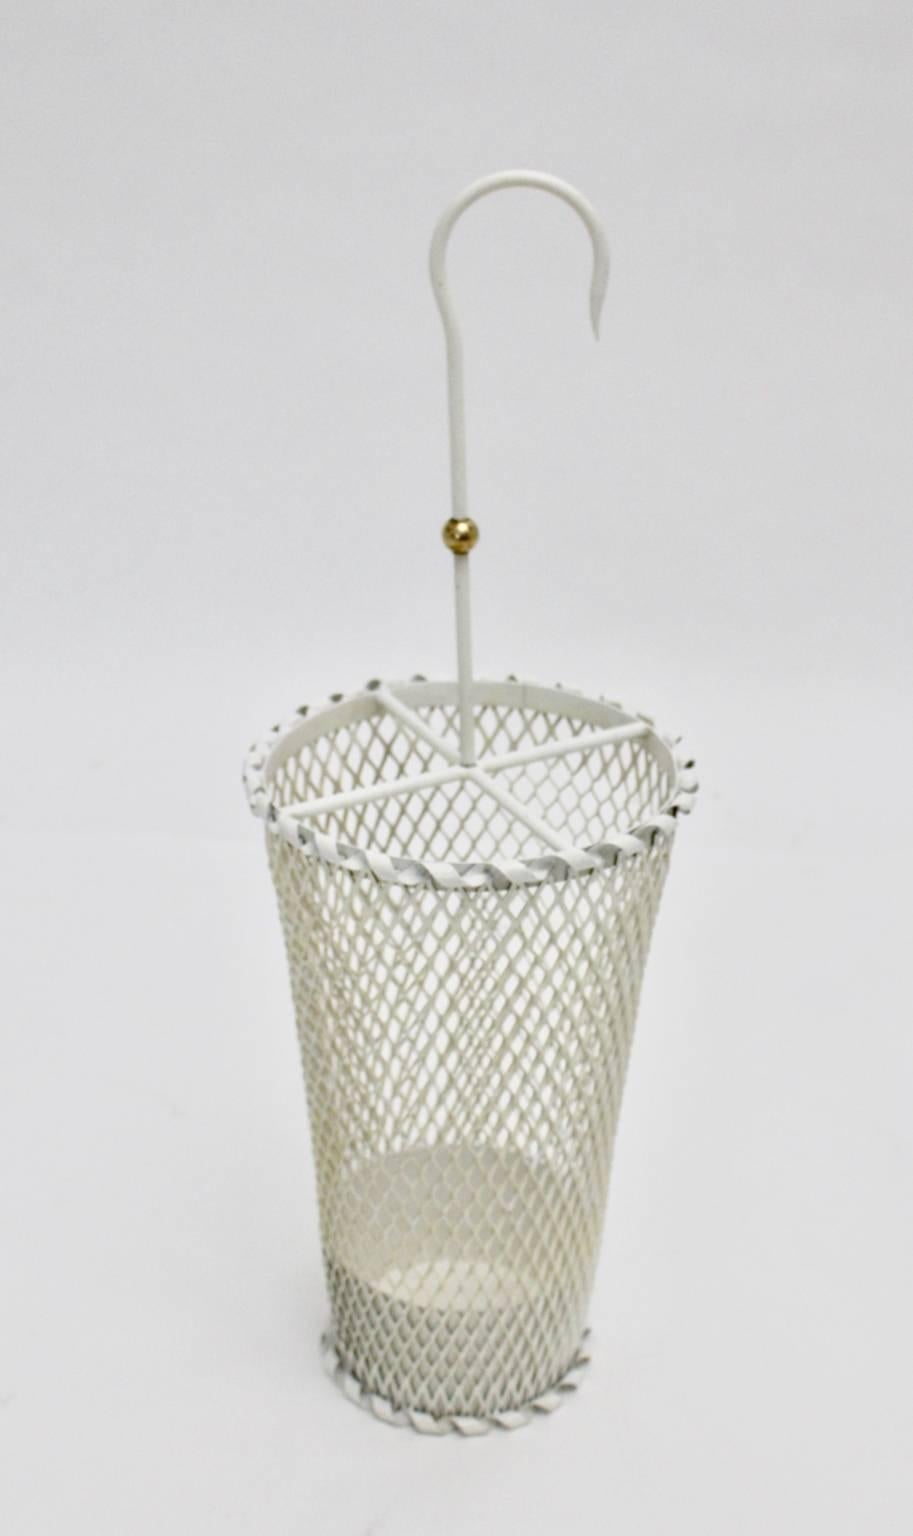 This very charming umbrella stand was designed by Mathieu Matégot and executed by Ateliers Matégot in the 1950s.
The umbrella stand was made of perforated white metal and features a very nice brass ball on the handle.
The condition is very good